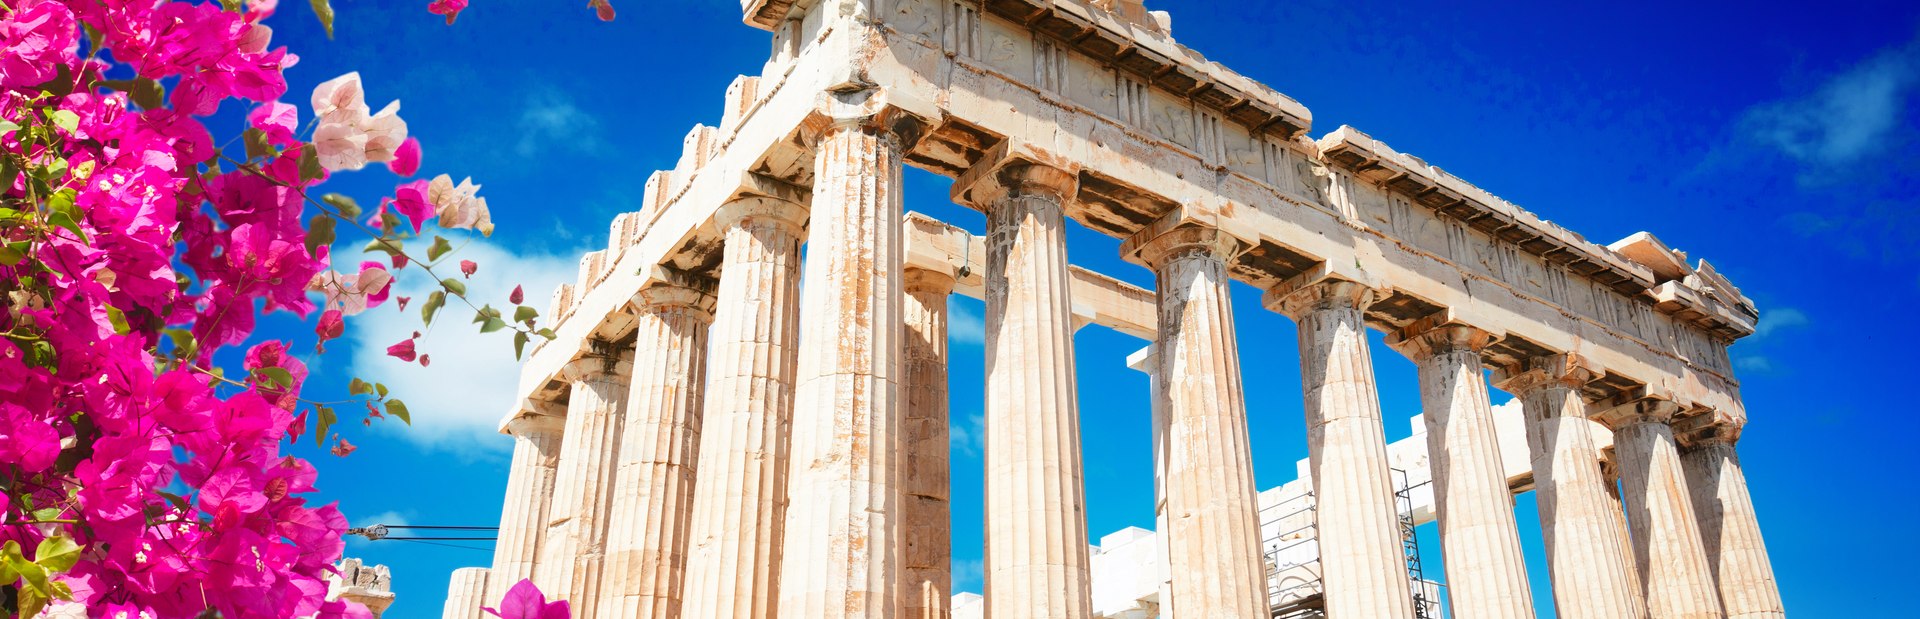 Athens guide